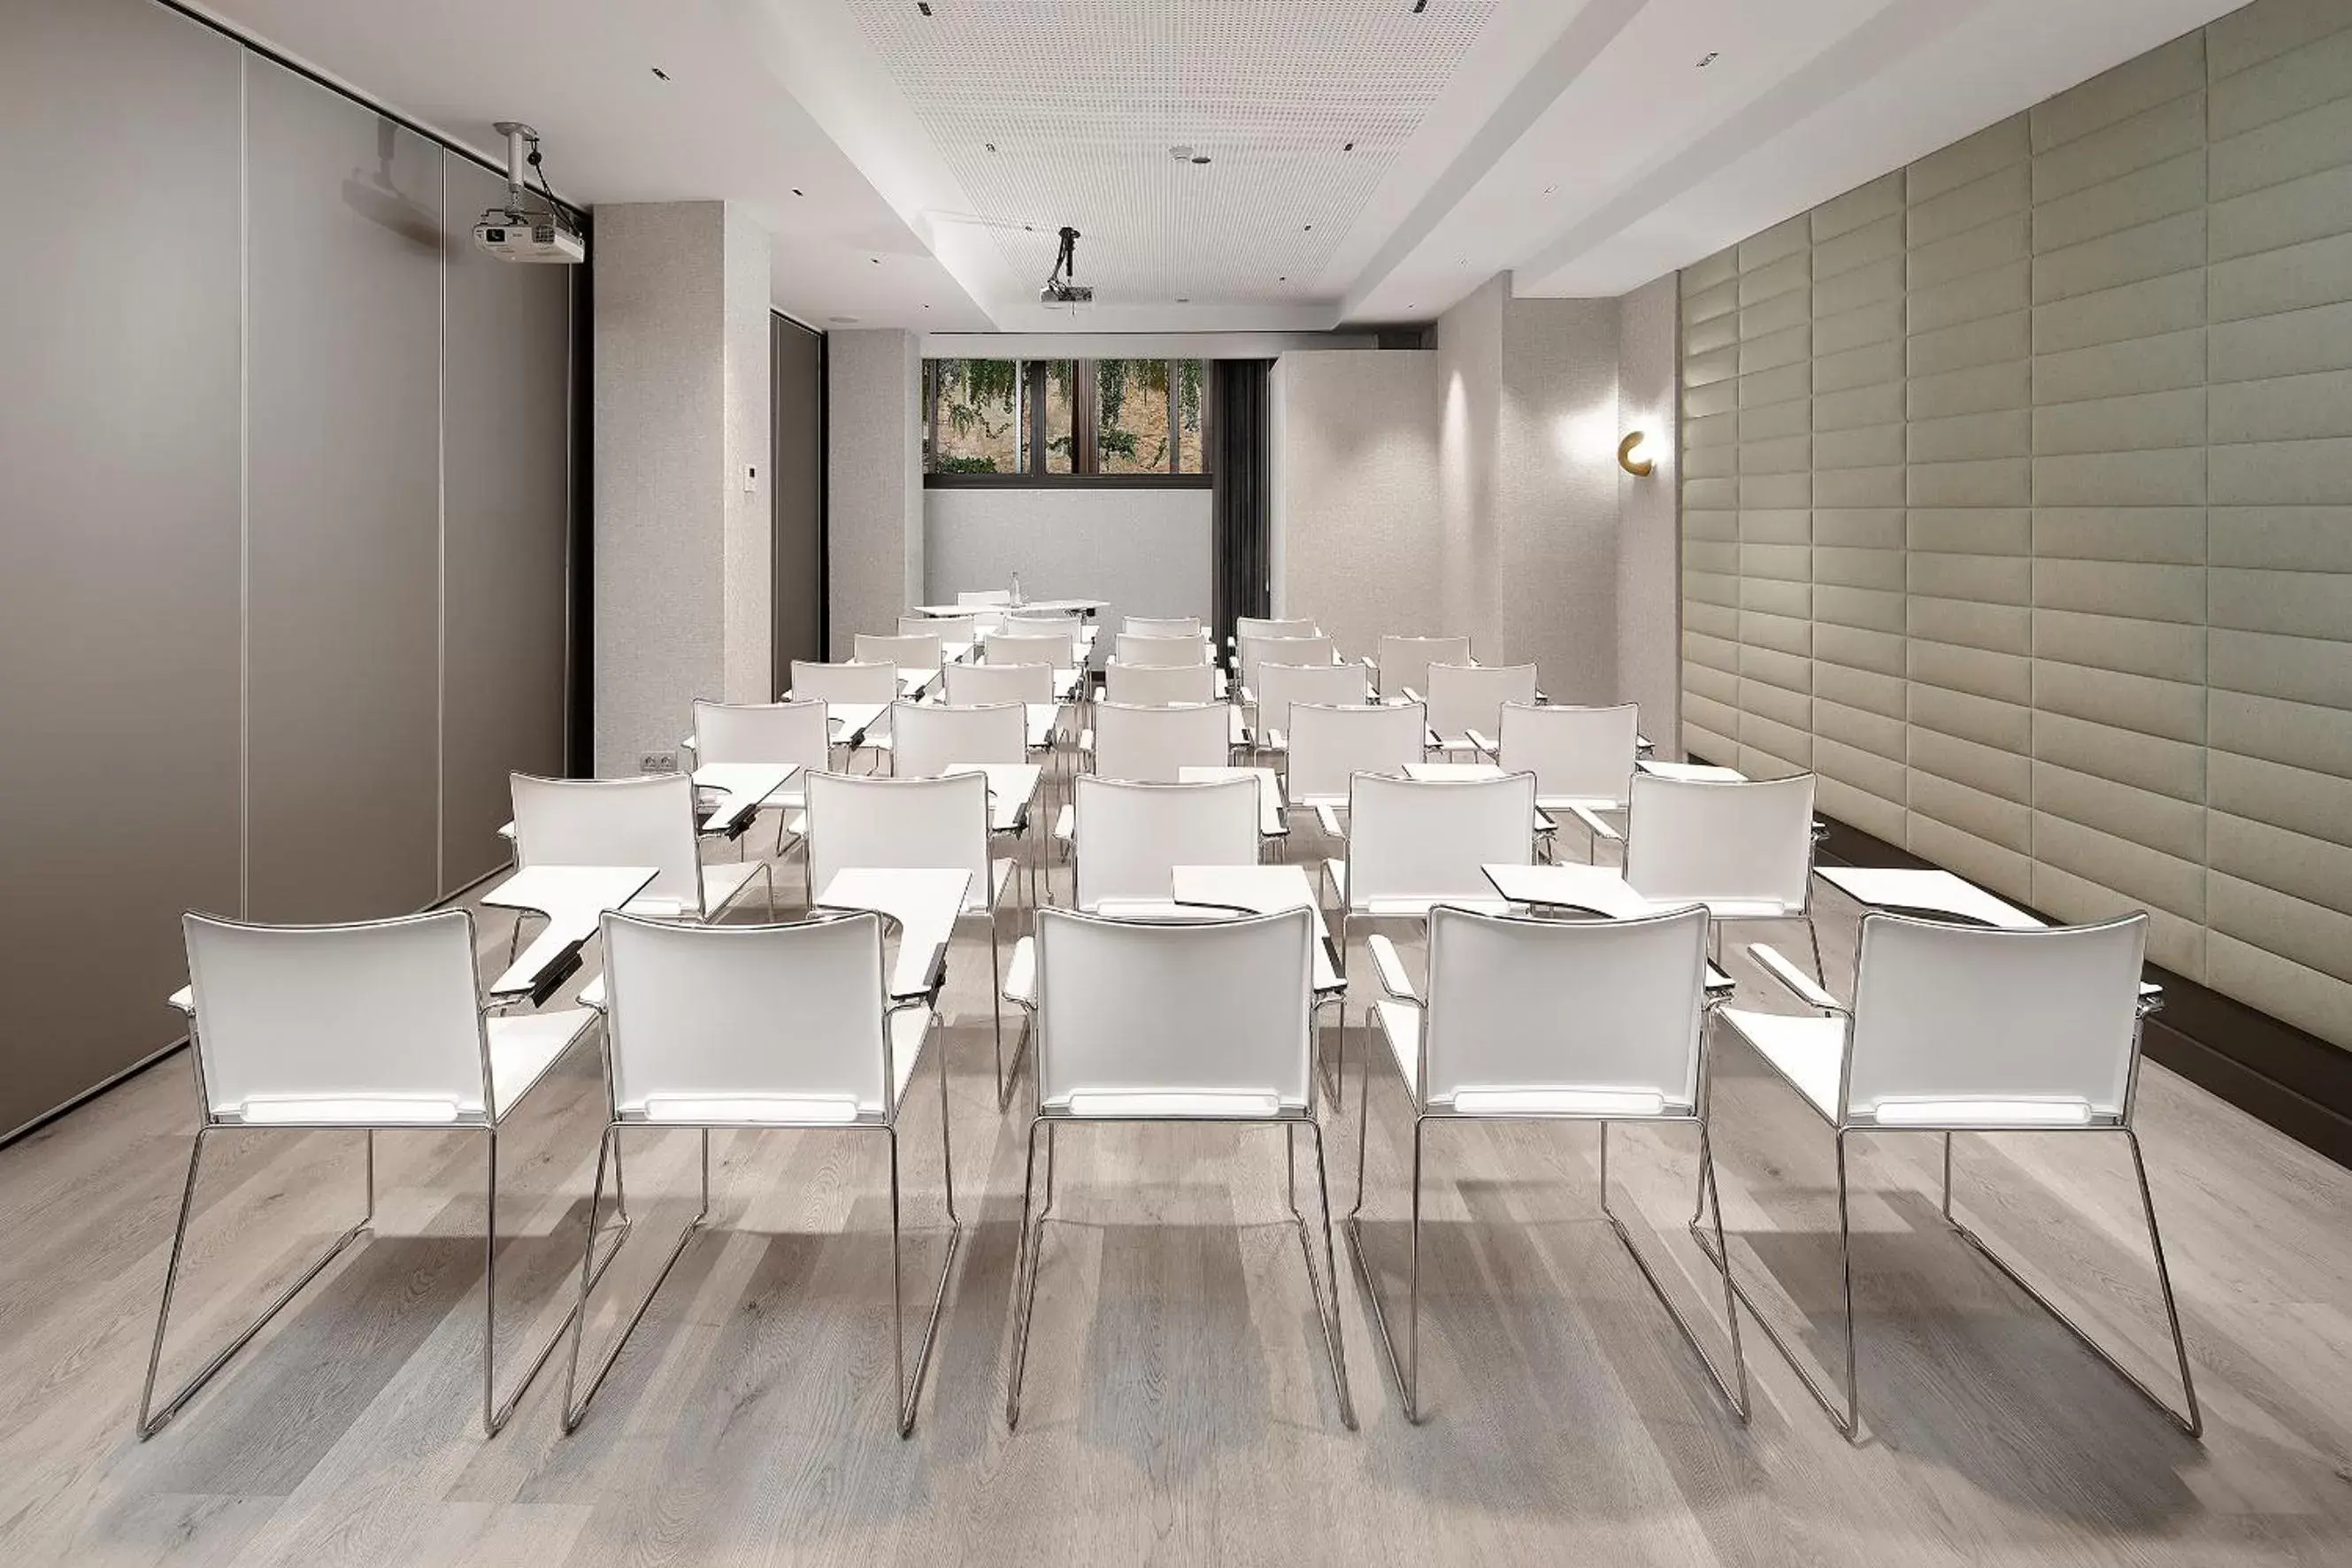 Meeting/conference room in Olivia Plaza Hotel